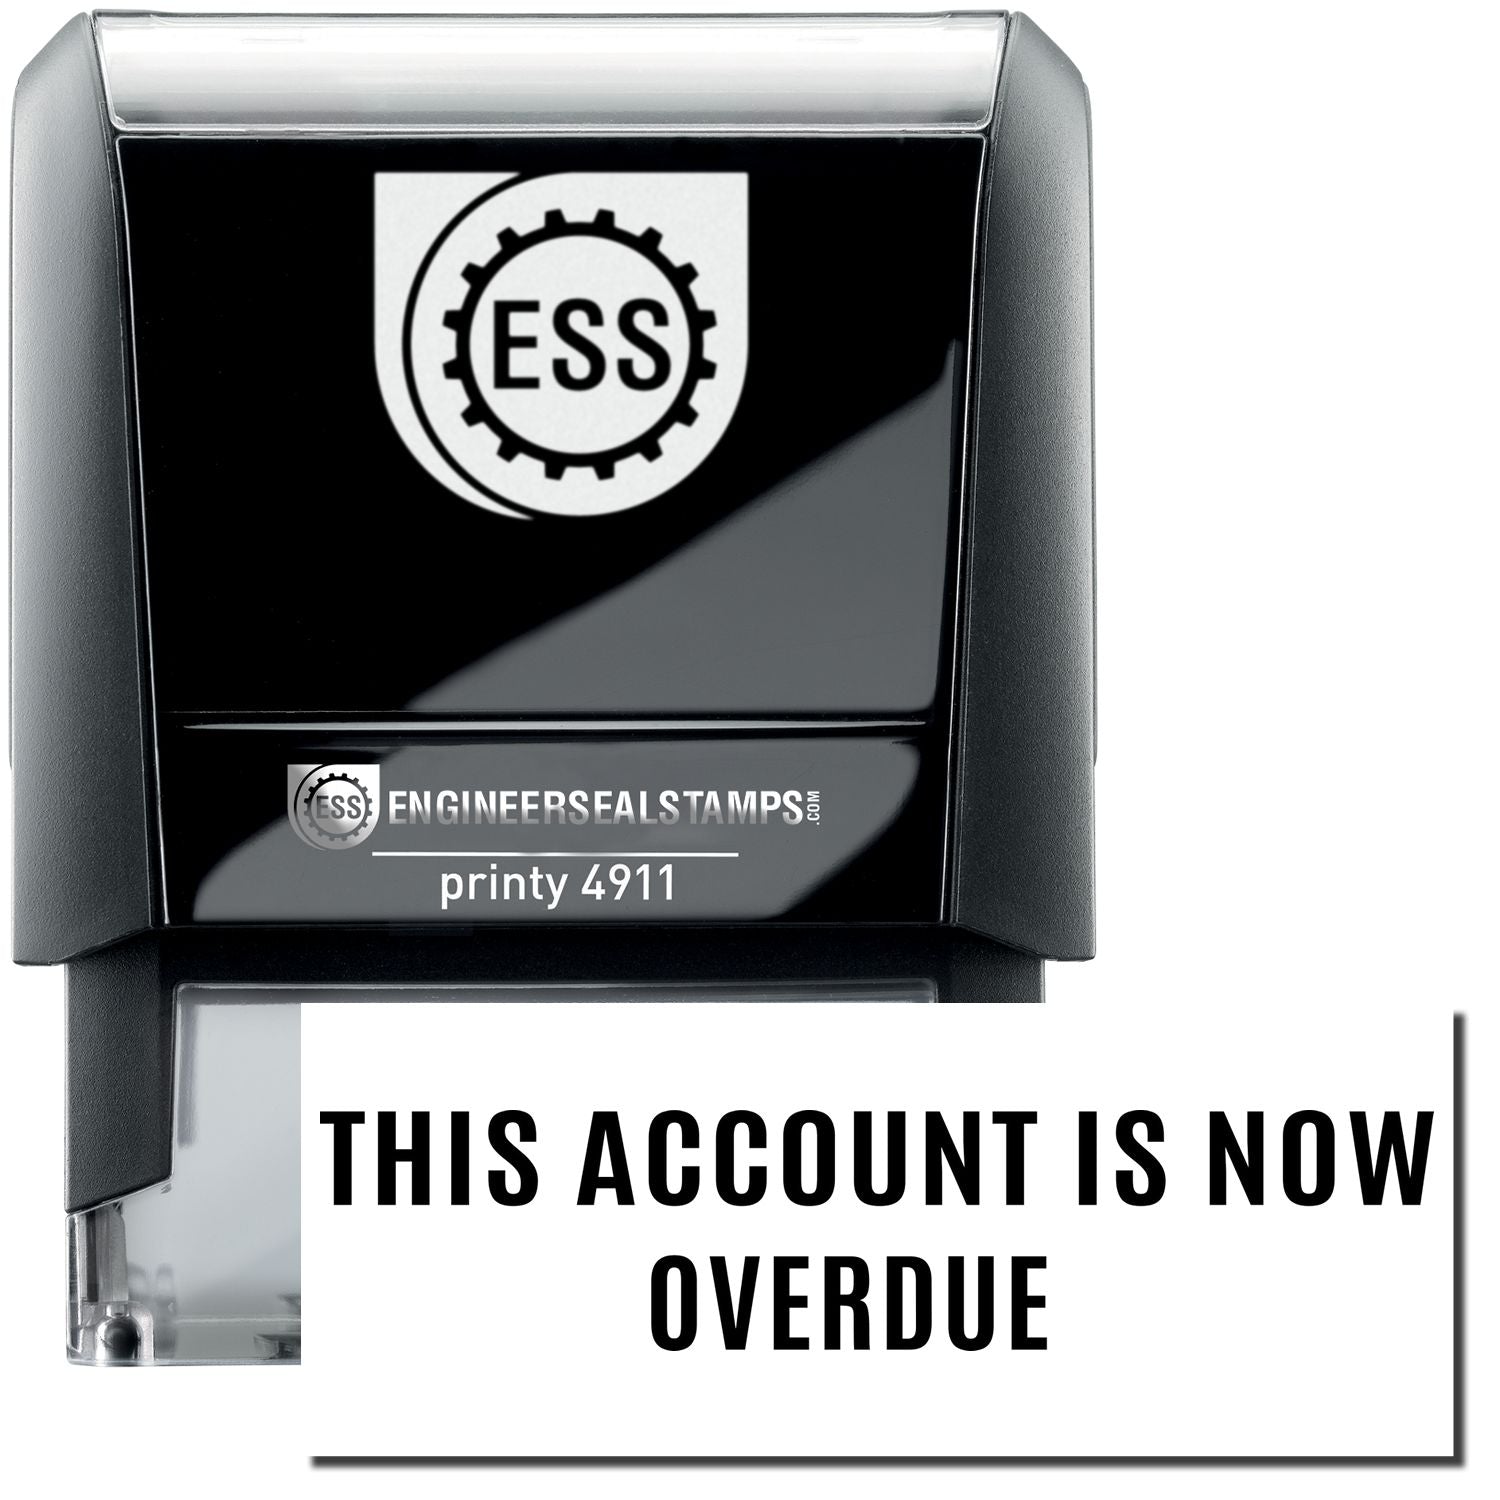 A self-inking stamp with a stamped image showing how the text "THIS ACCOUNT IS NOW OVERDUE" in a narrow font is displayed after stamping.